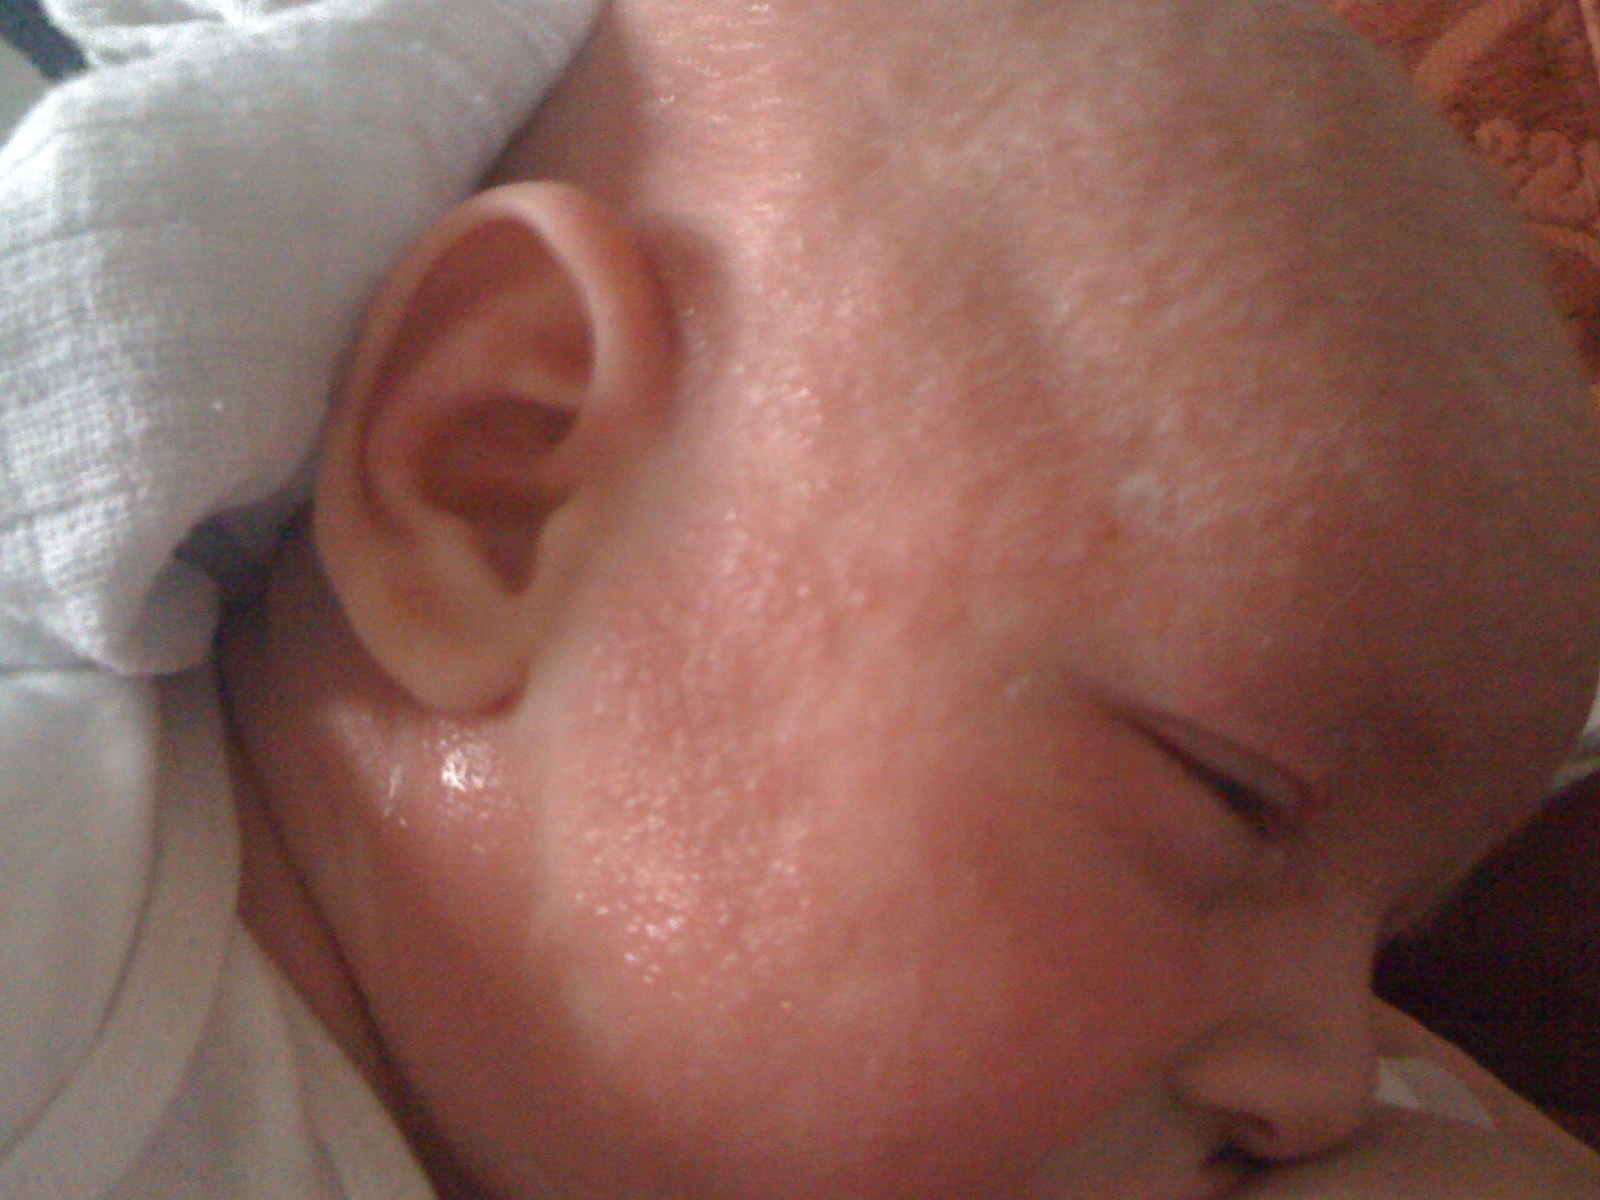 Allergy Awareness Week - when a little bit 'will' hurt. Callum in this photo has a severe allergic reaction, severely swollen, covered in pus, and his eyes are slits as he struggles with the reaction. www.intolerantgourmand.com